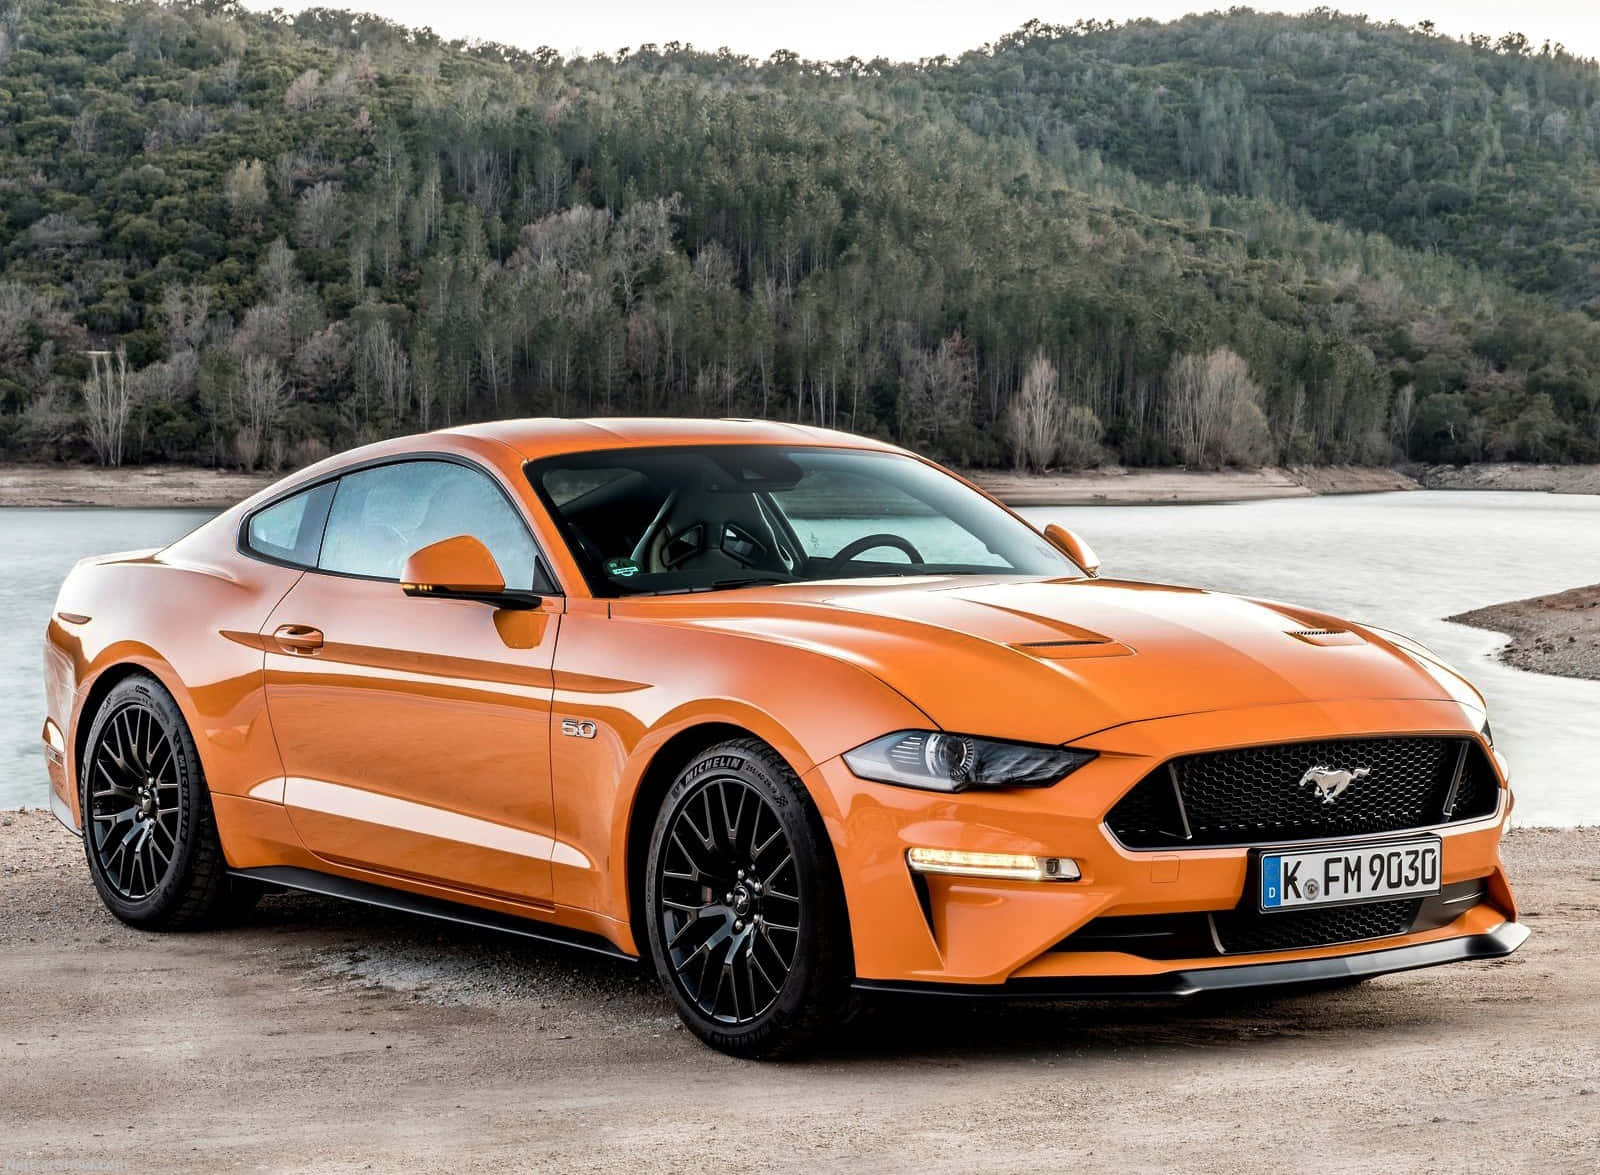 Ford Mustang - An Icon of American Muscle Cars